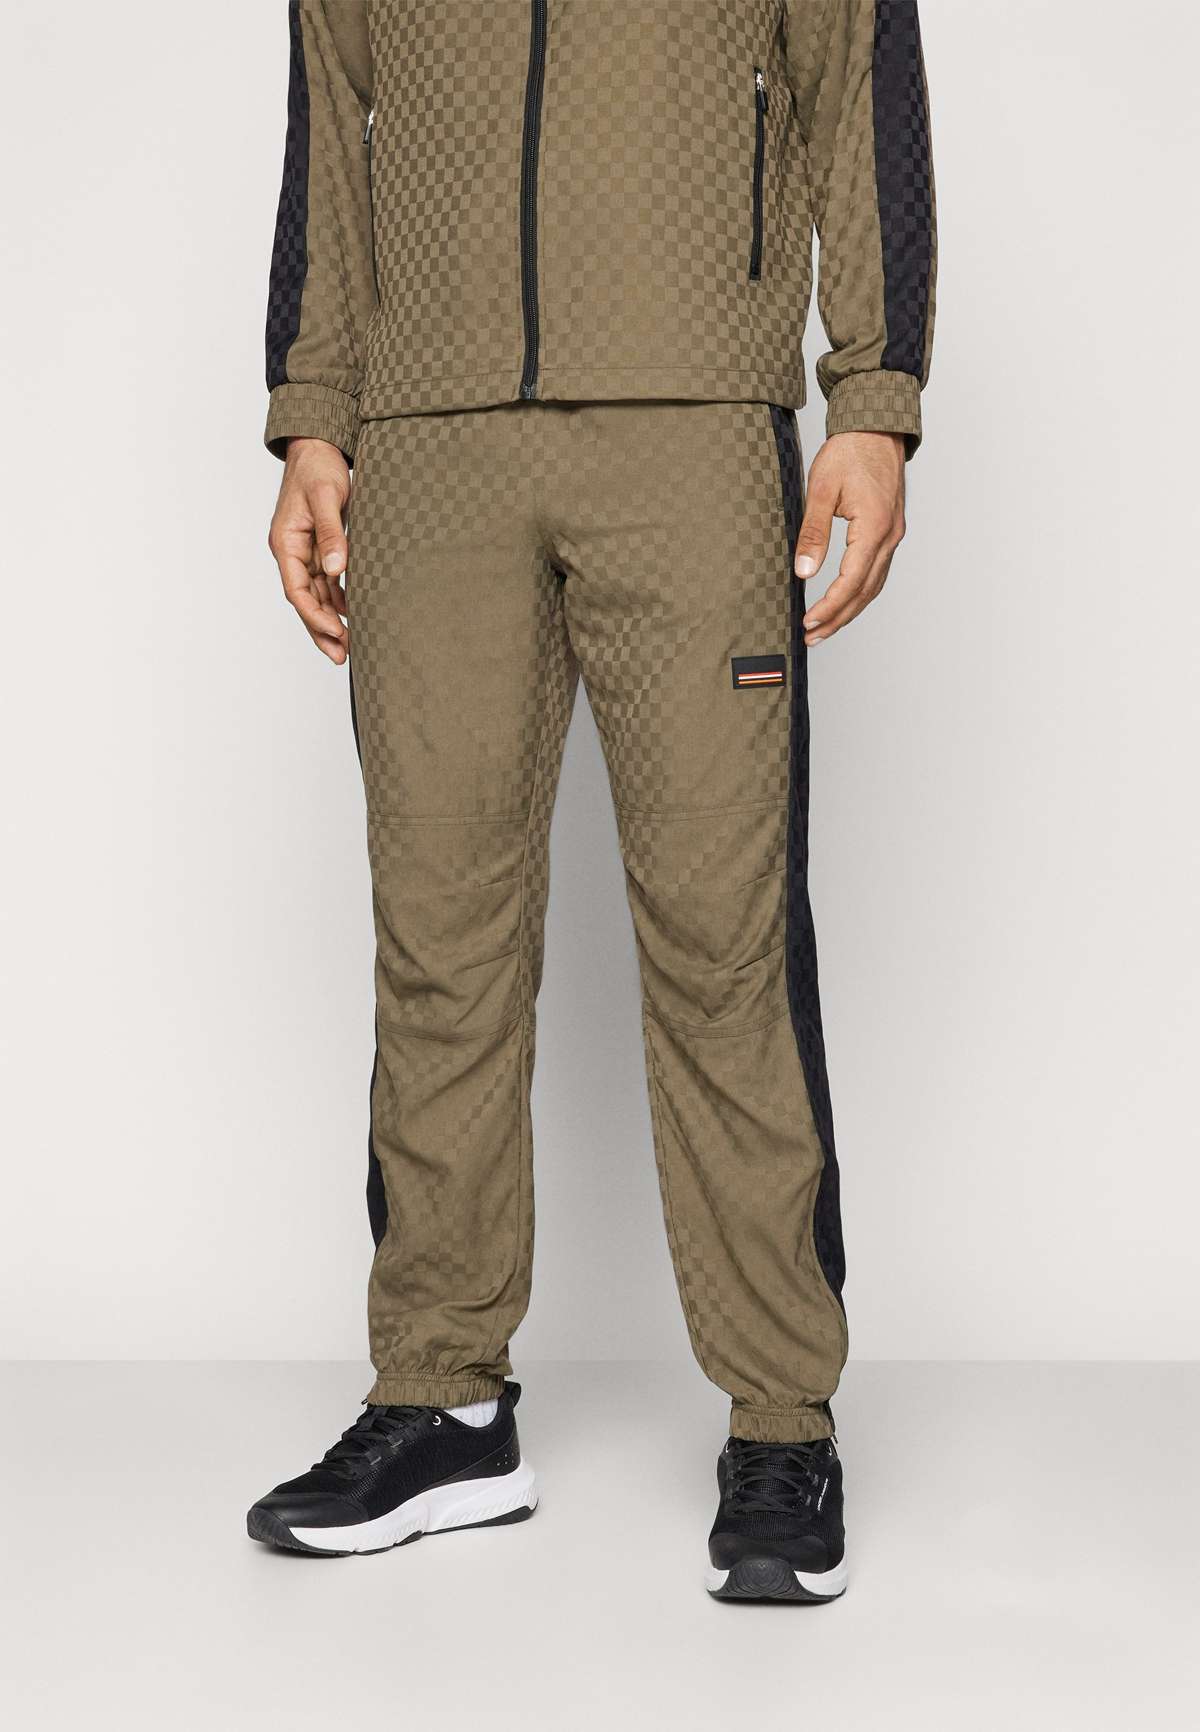 Брюки WEST DIVISION PANT